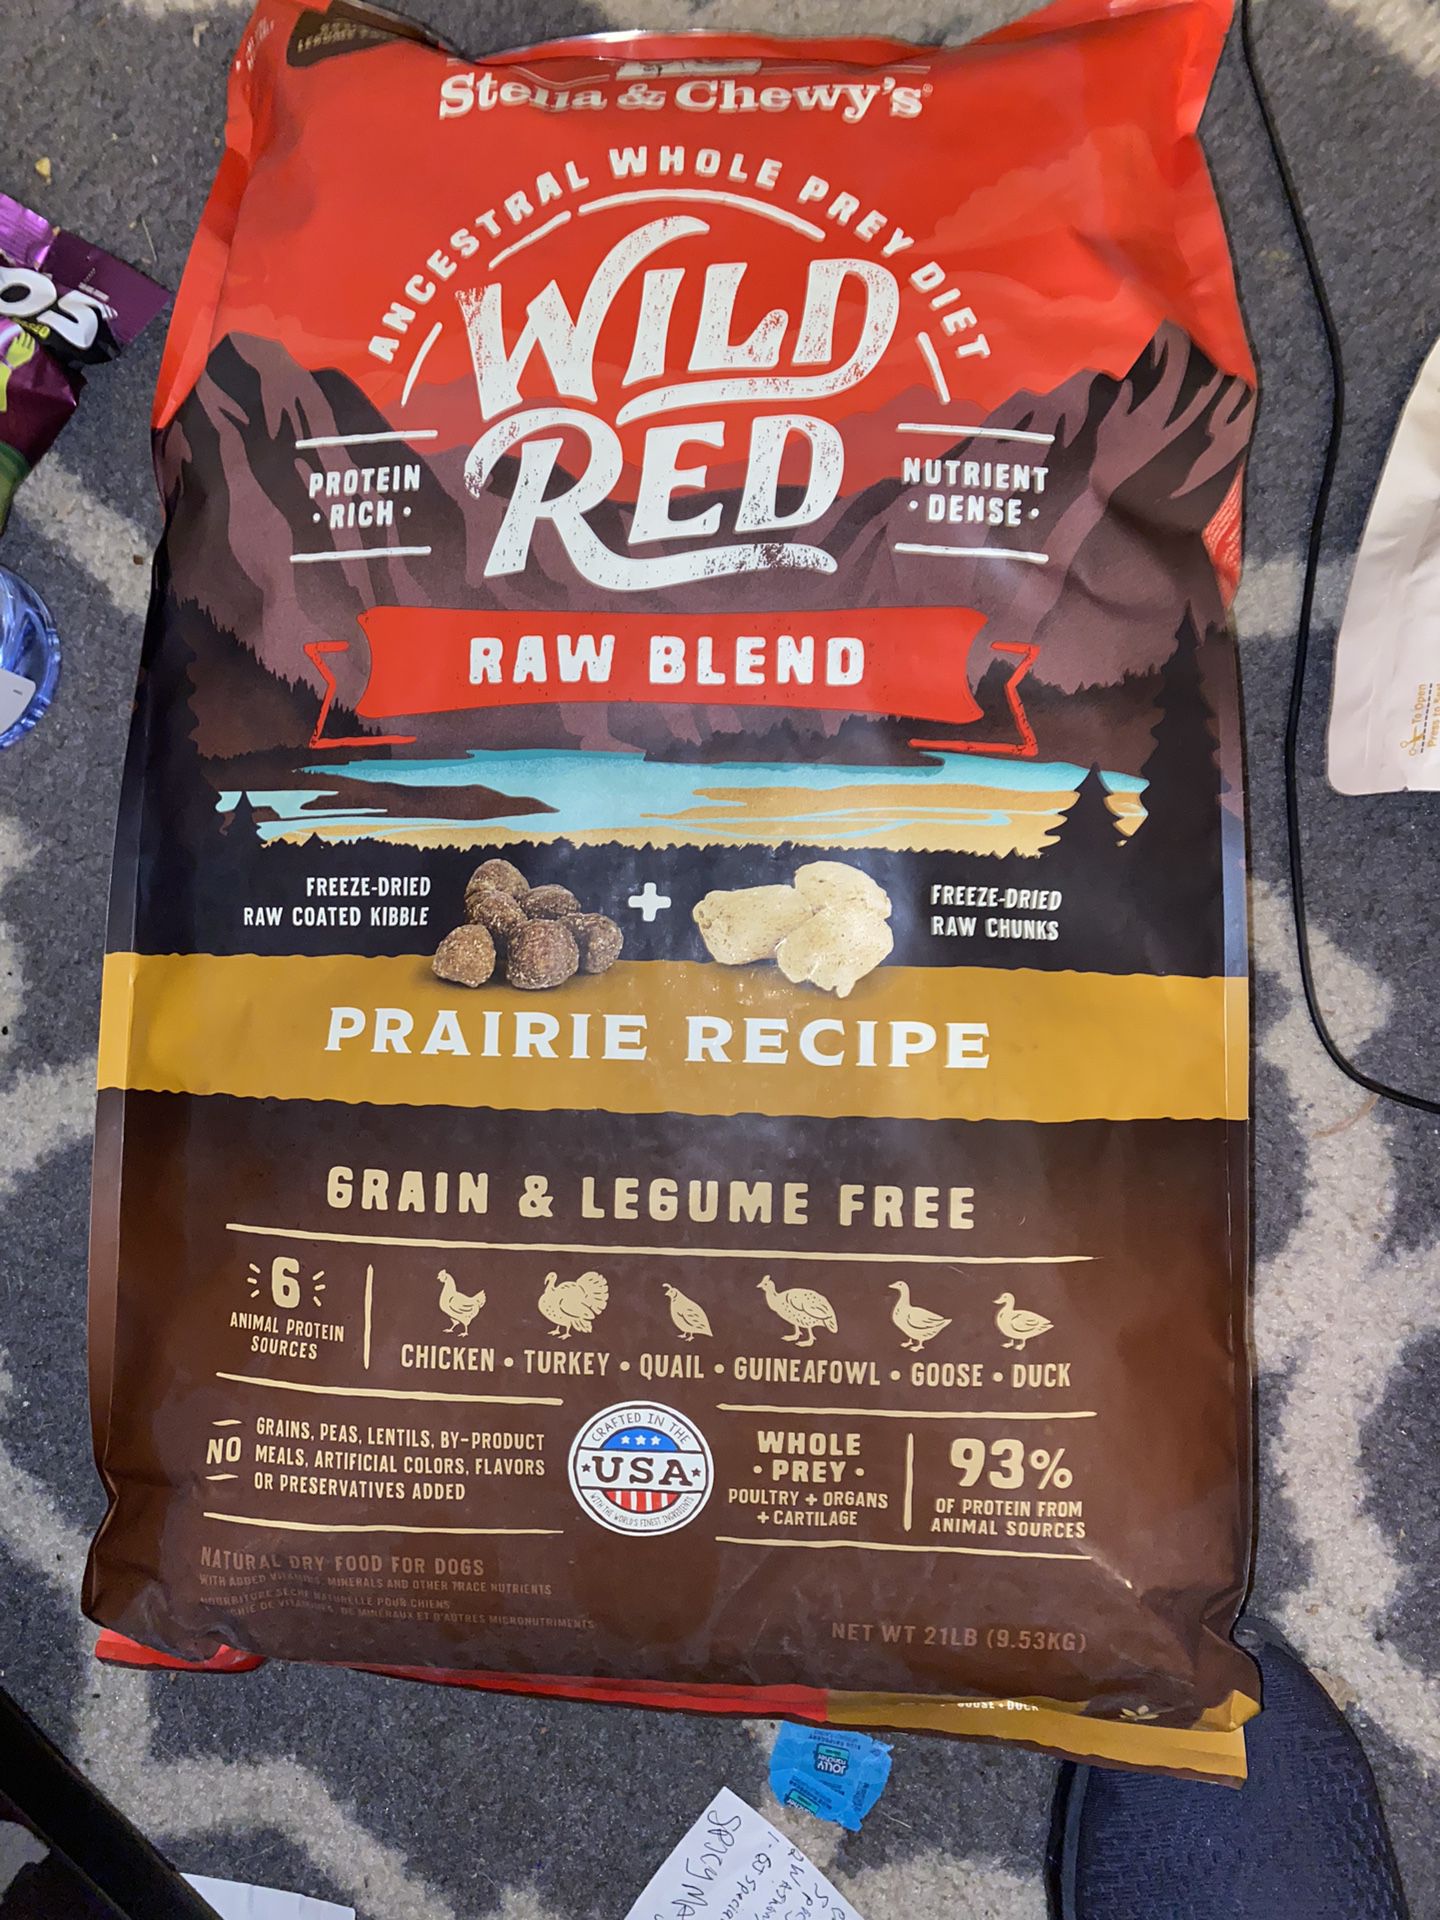 BRAND NEW UNOPENED!! Stella & Chewy's Wild Red Dry Dog Food Raw Blend High Protein Grain & Legume Free Prairie Recipe, 21 lb. Bag RETAILS FOR $93.99 o